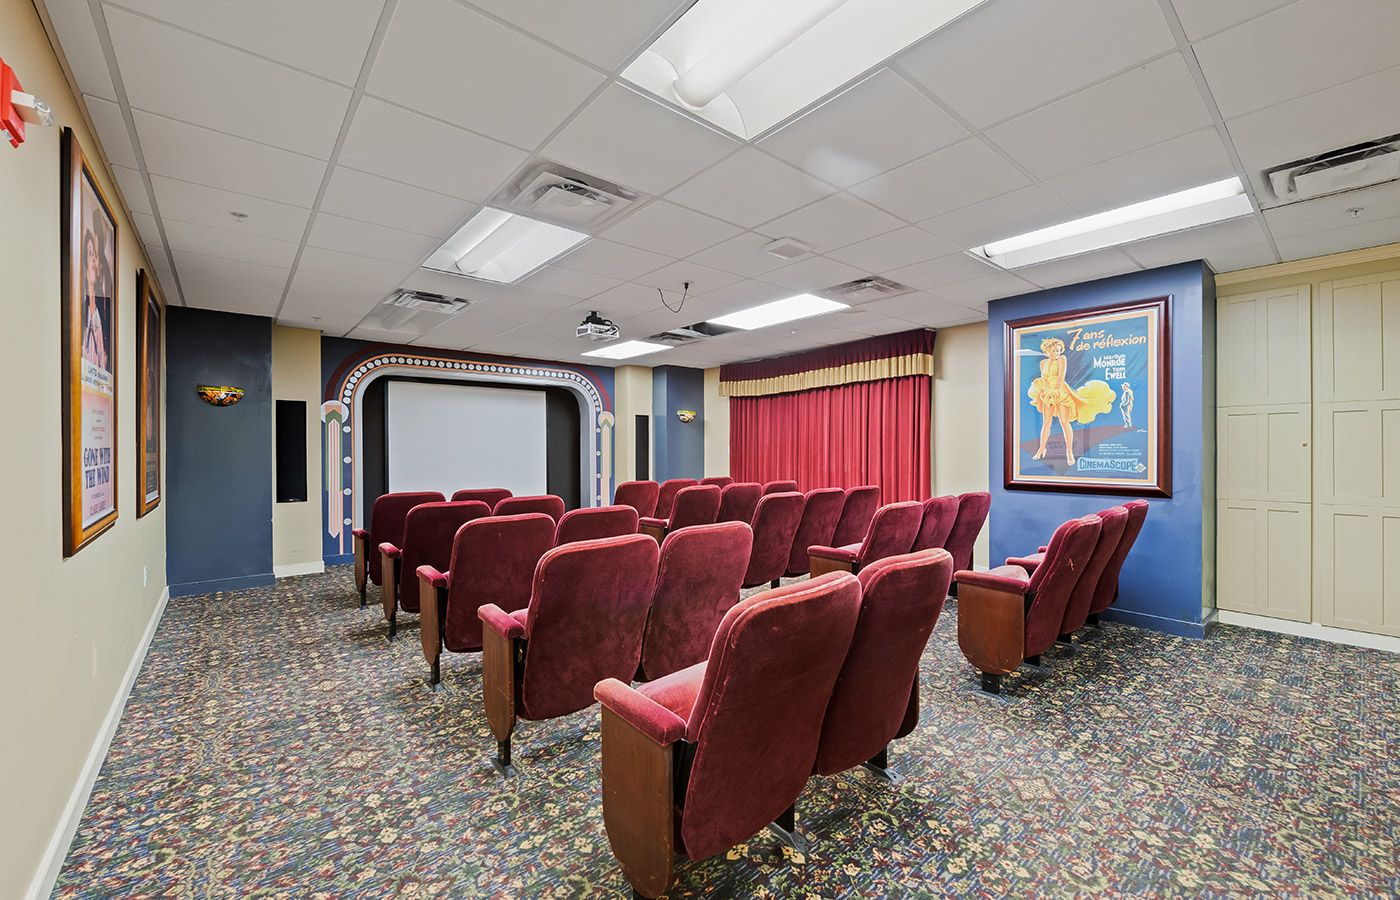 Theatre room including many comfy chair facing the projector